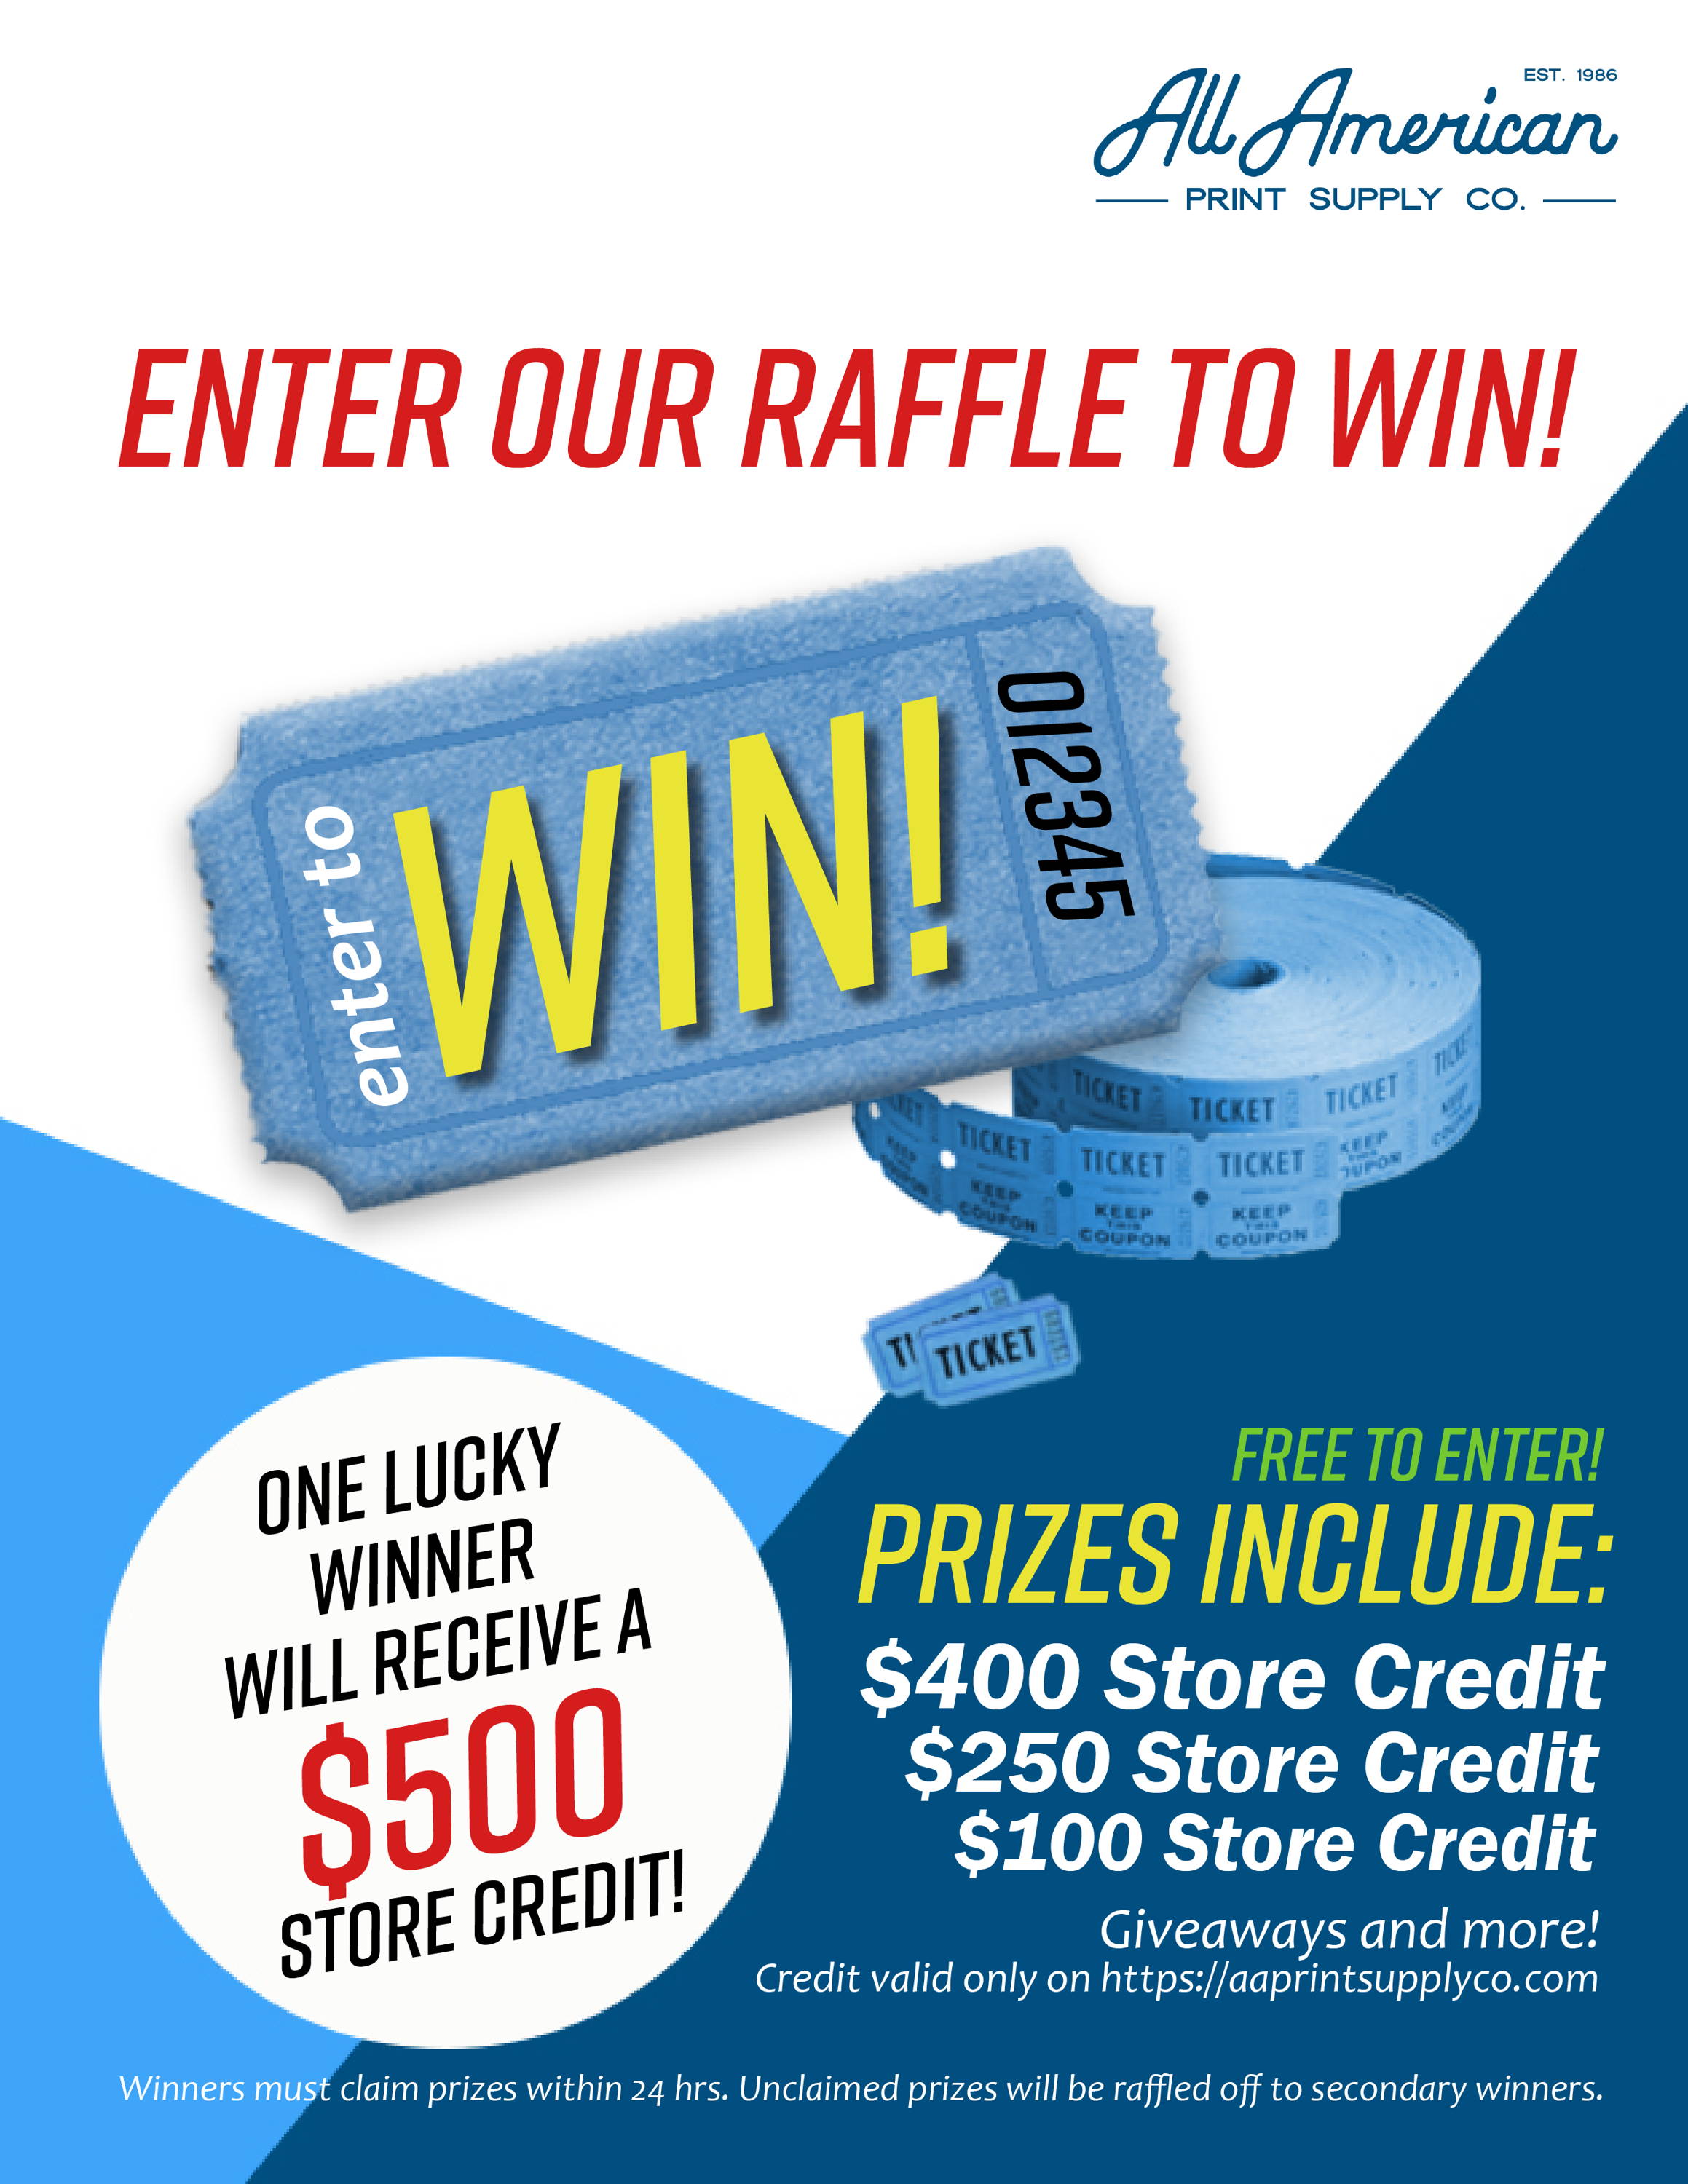 One lucky winner will receive $500 store credit